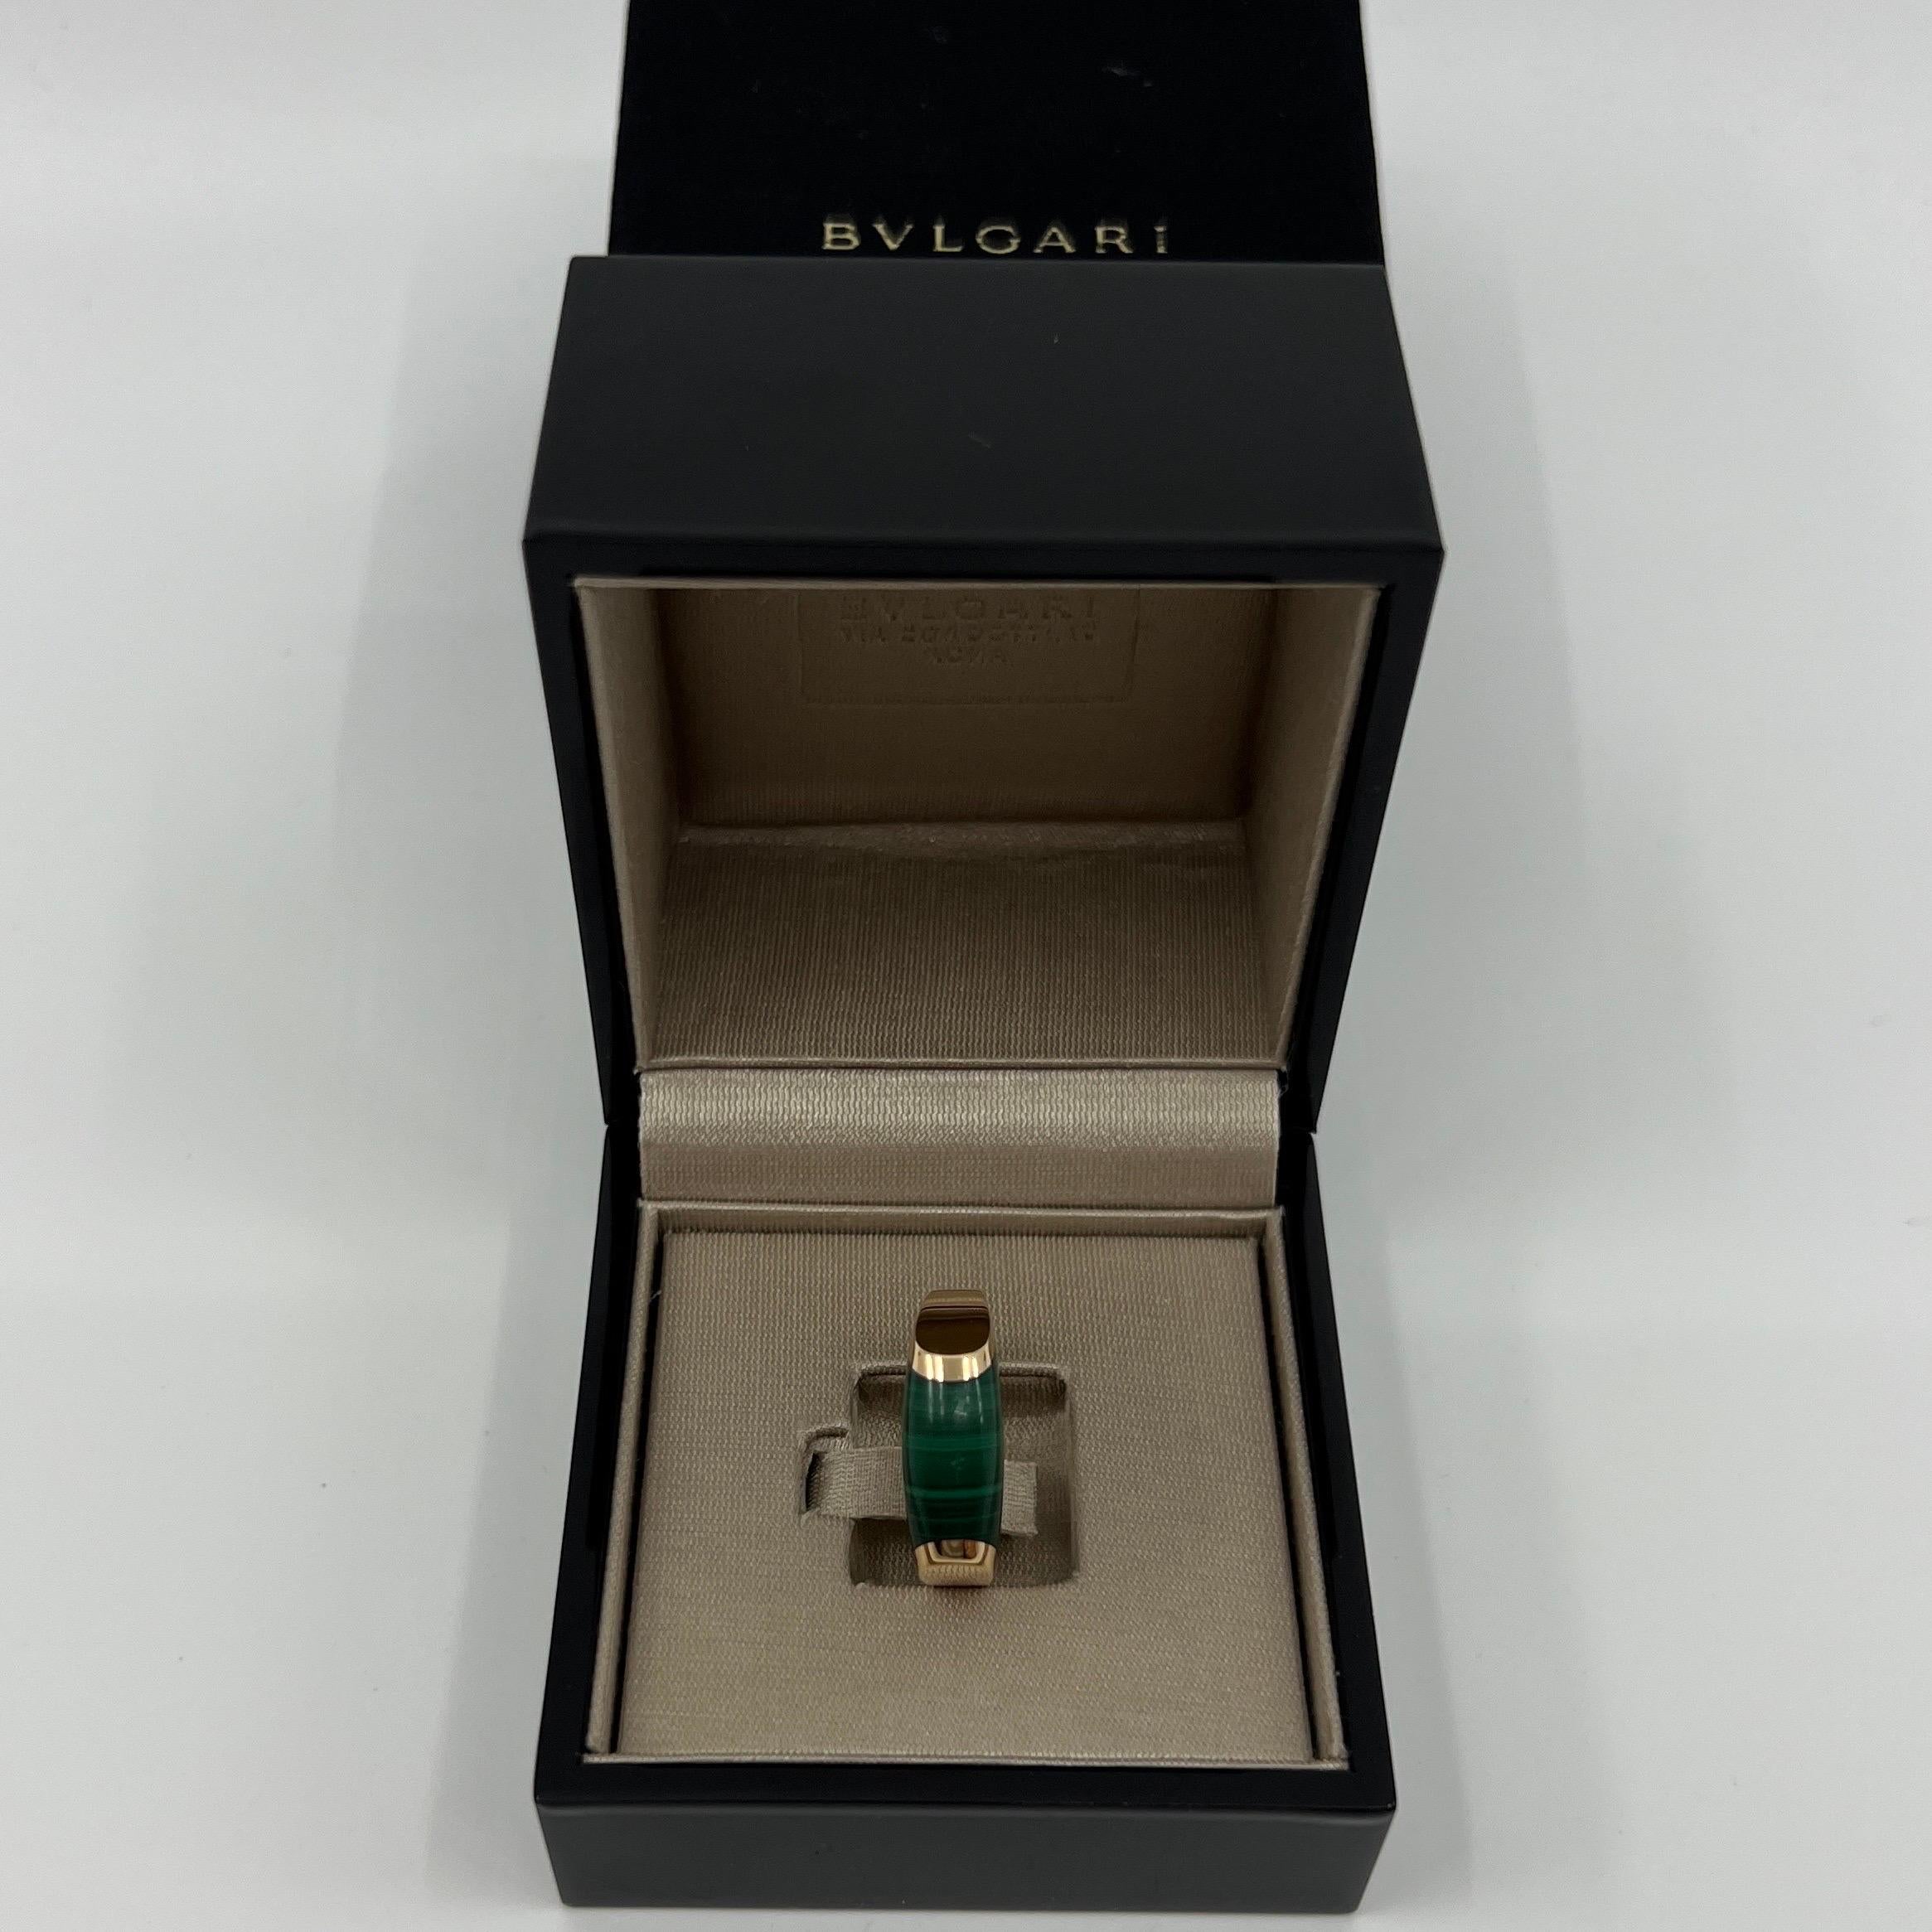 Rare Bvlgari Green Malachite Tronchetto Mvsa 18k Rose Gold Ring.

Beautiful domed green malachite set in a fine 18k rose gold tension set ring.

In excellent condition, has been professionally polished and cleaned.

Ring size: UK Q - EU 58 - US 8.5.